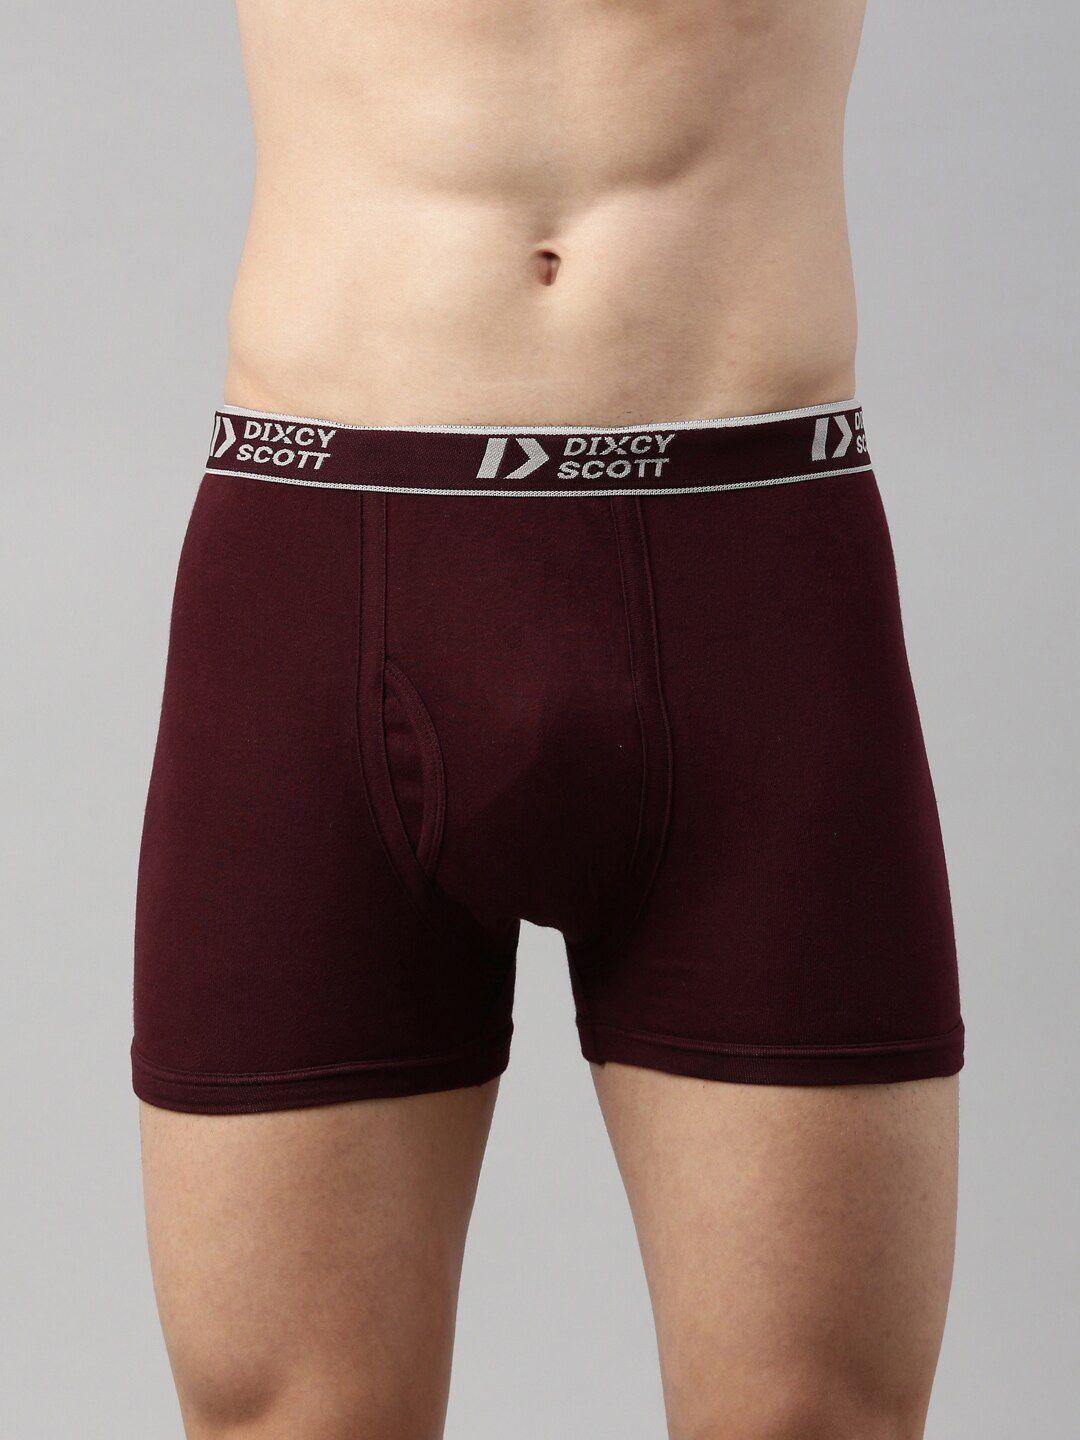 dixcy scott men maroon solid pure cotton trunks dso-titan trunk-p1